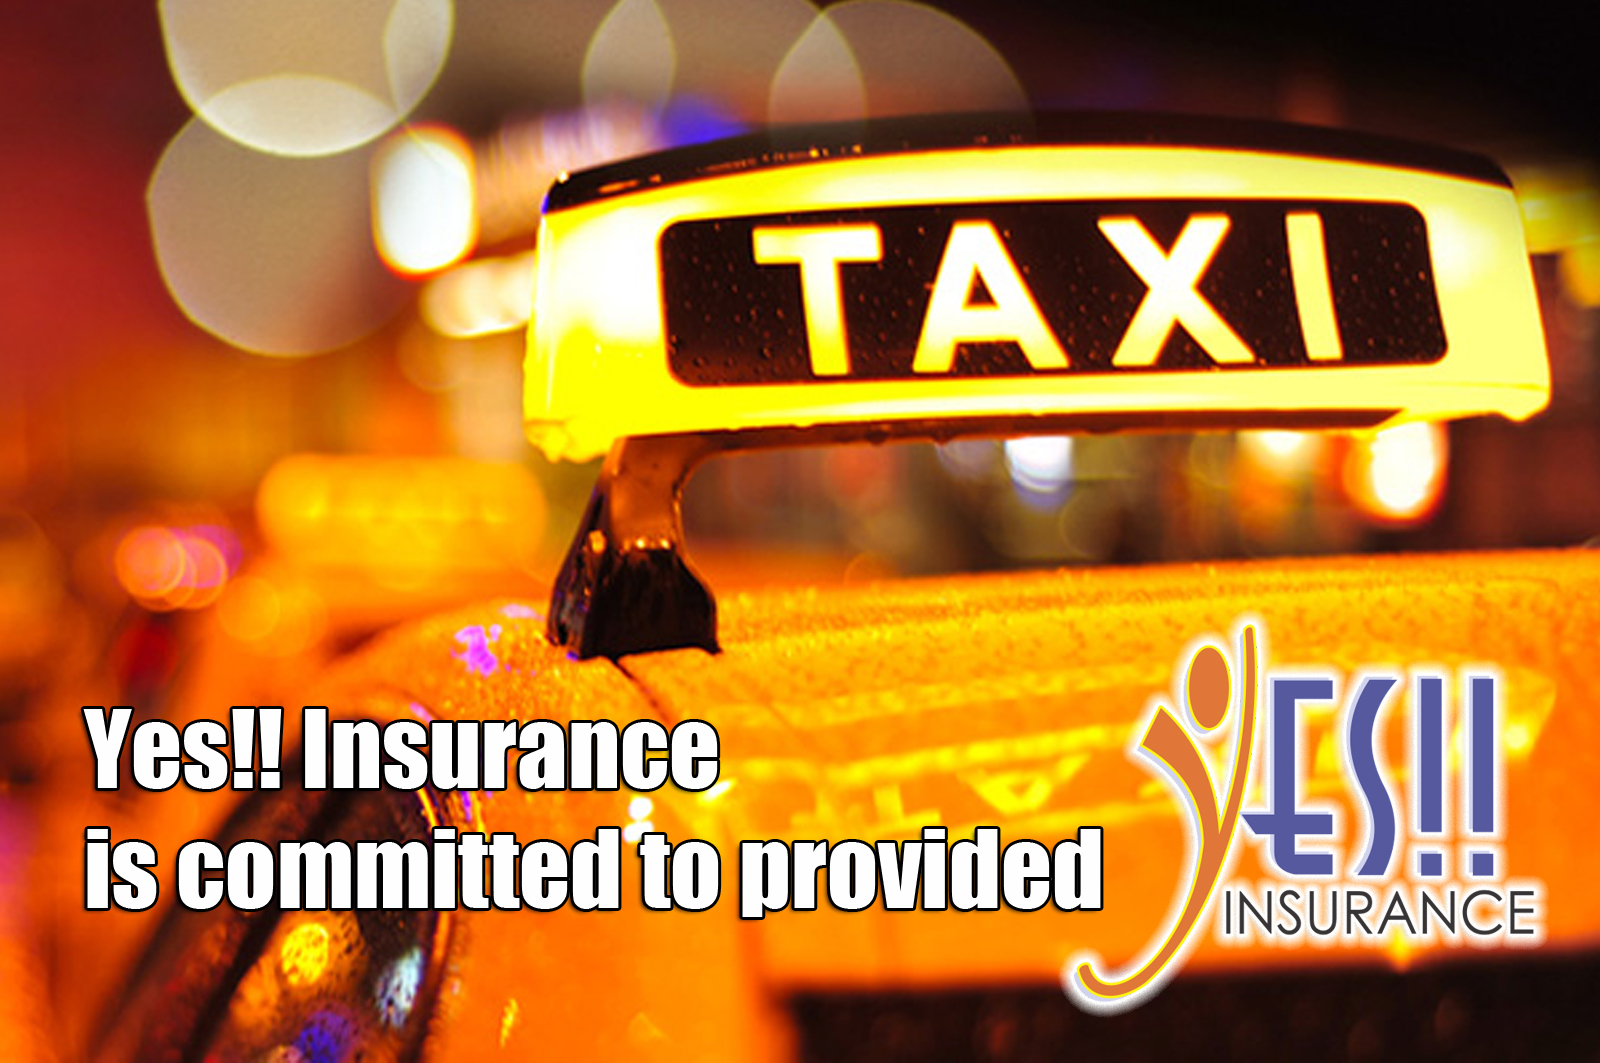 Taxi insurance - Auto Insurance in Gainesville